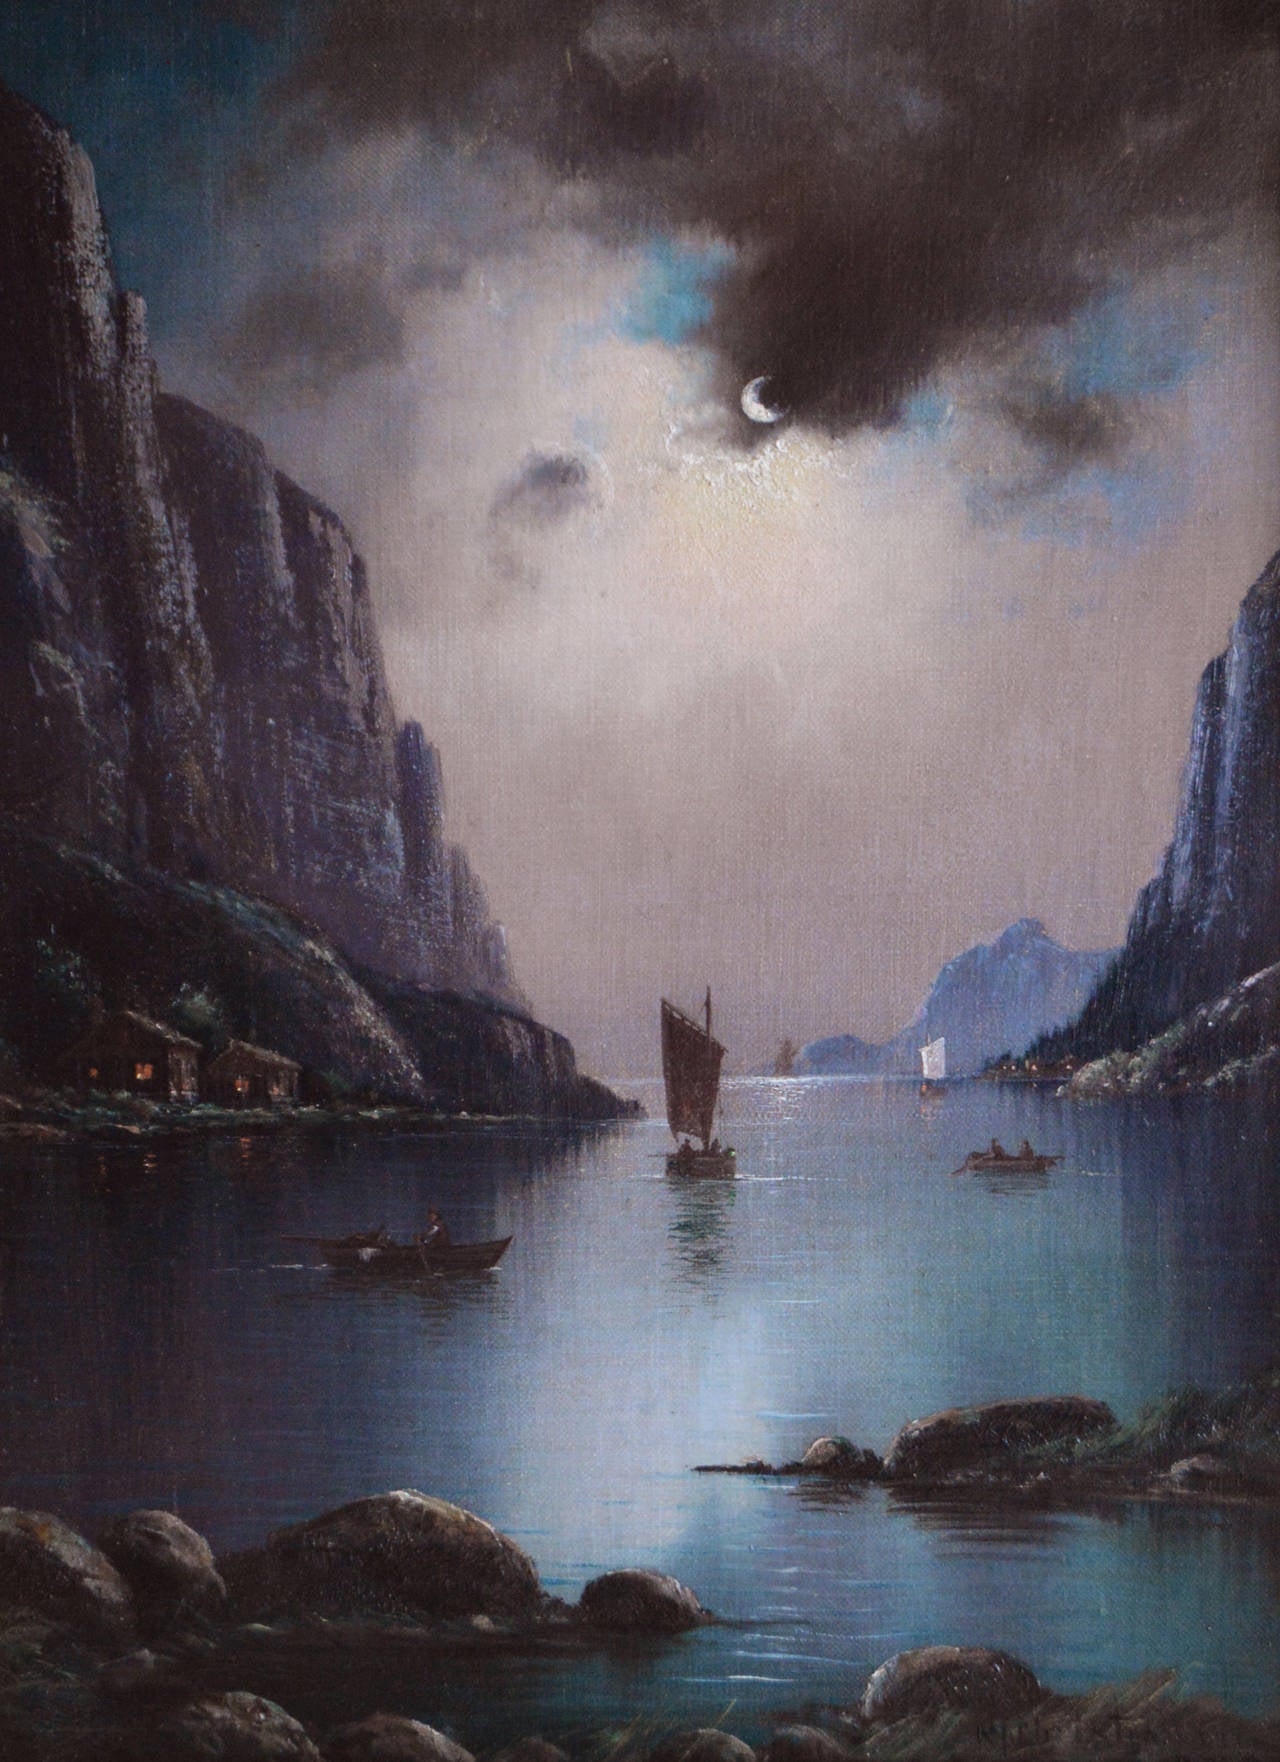 Moonlit Fjord, oil on canvas - Painting by Nils Hans Christiansen